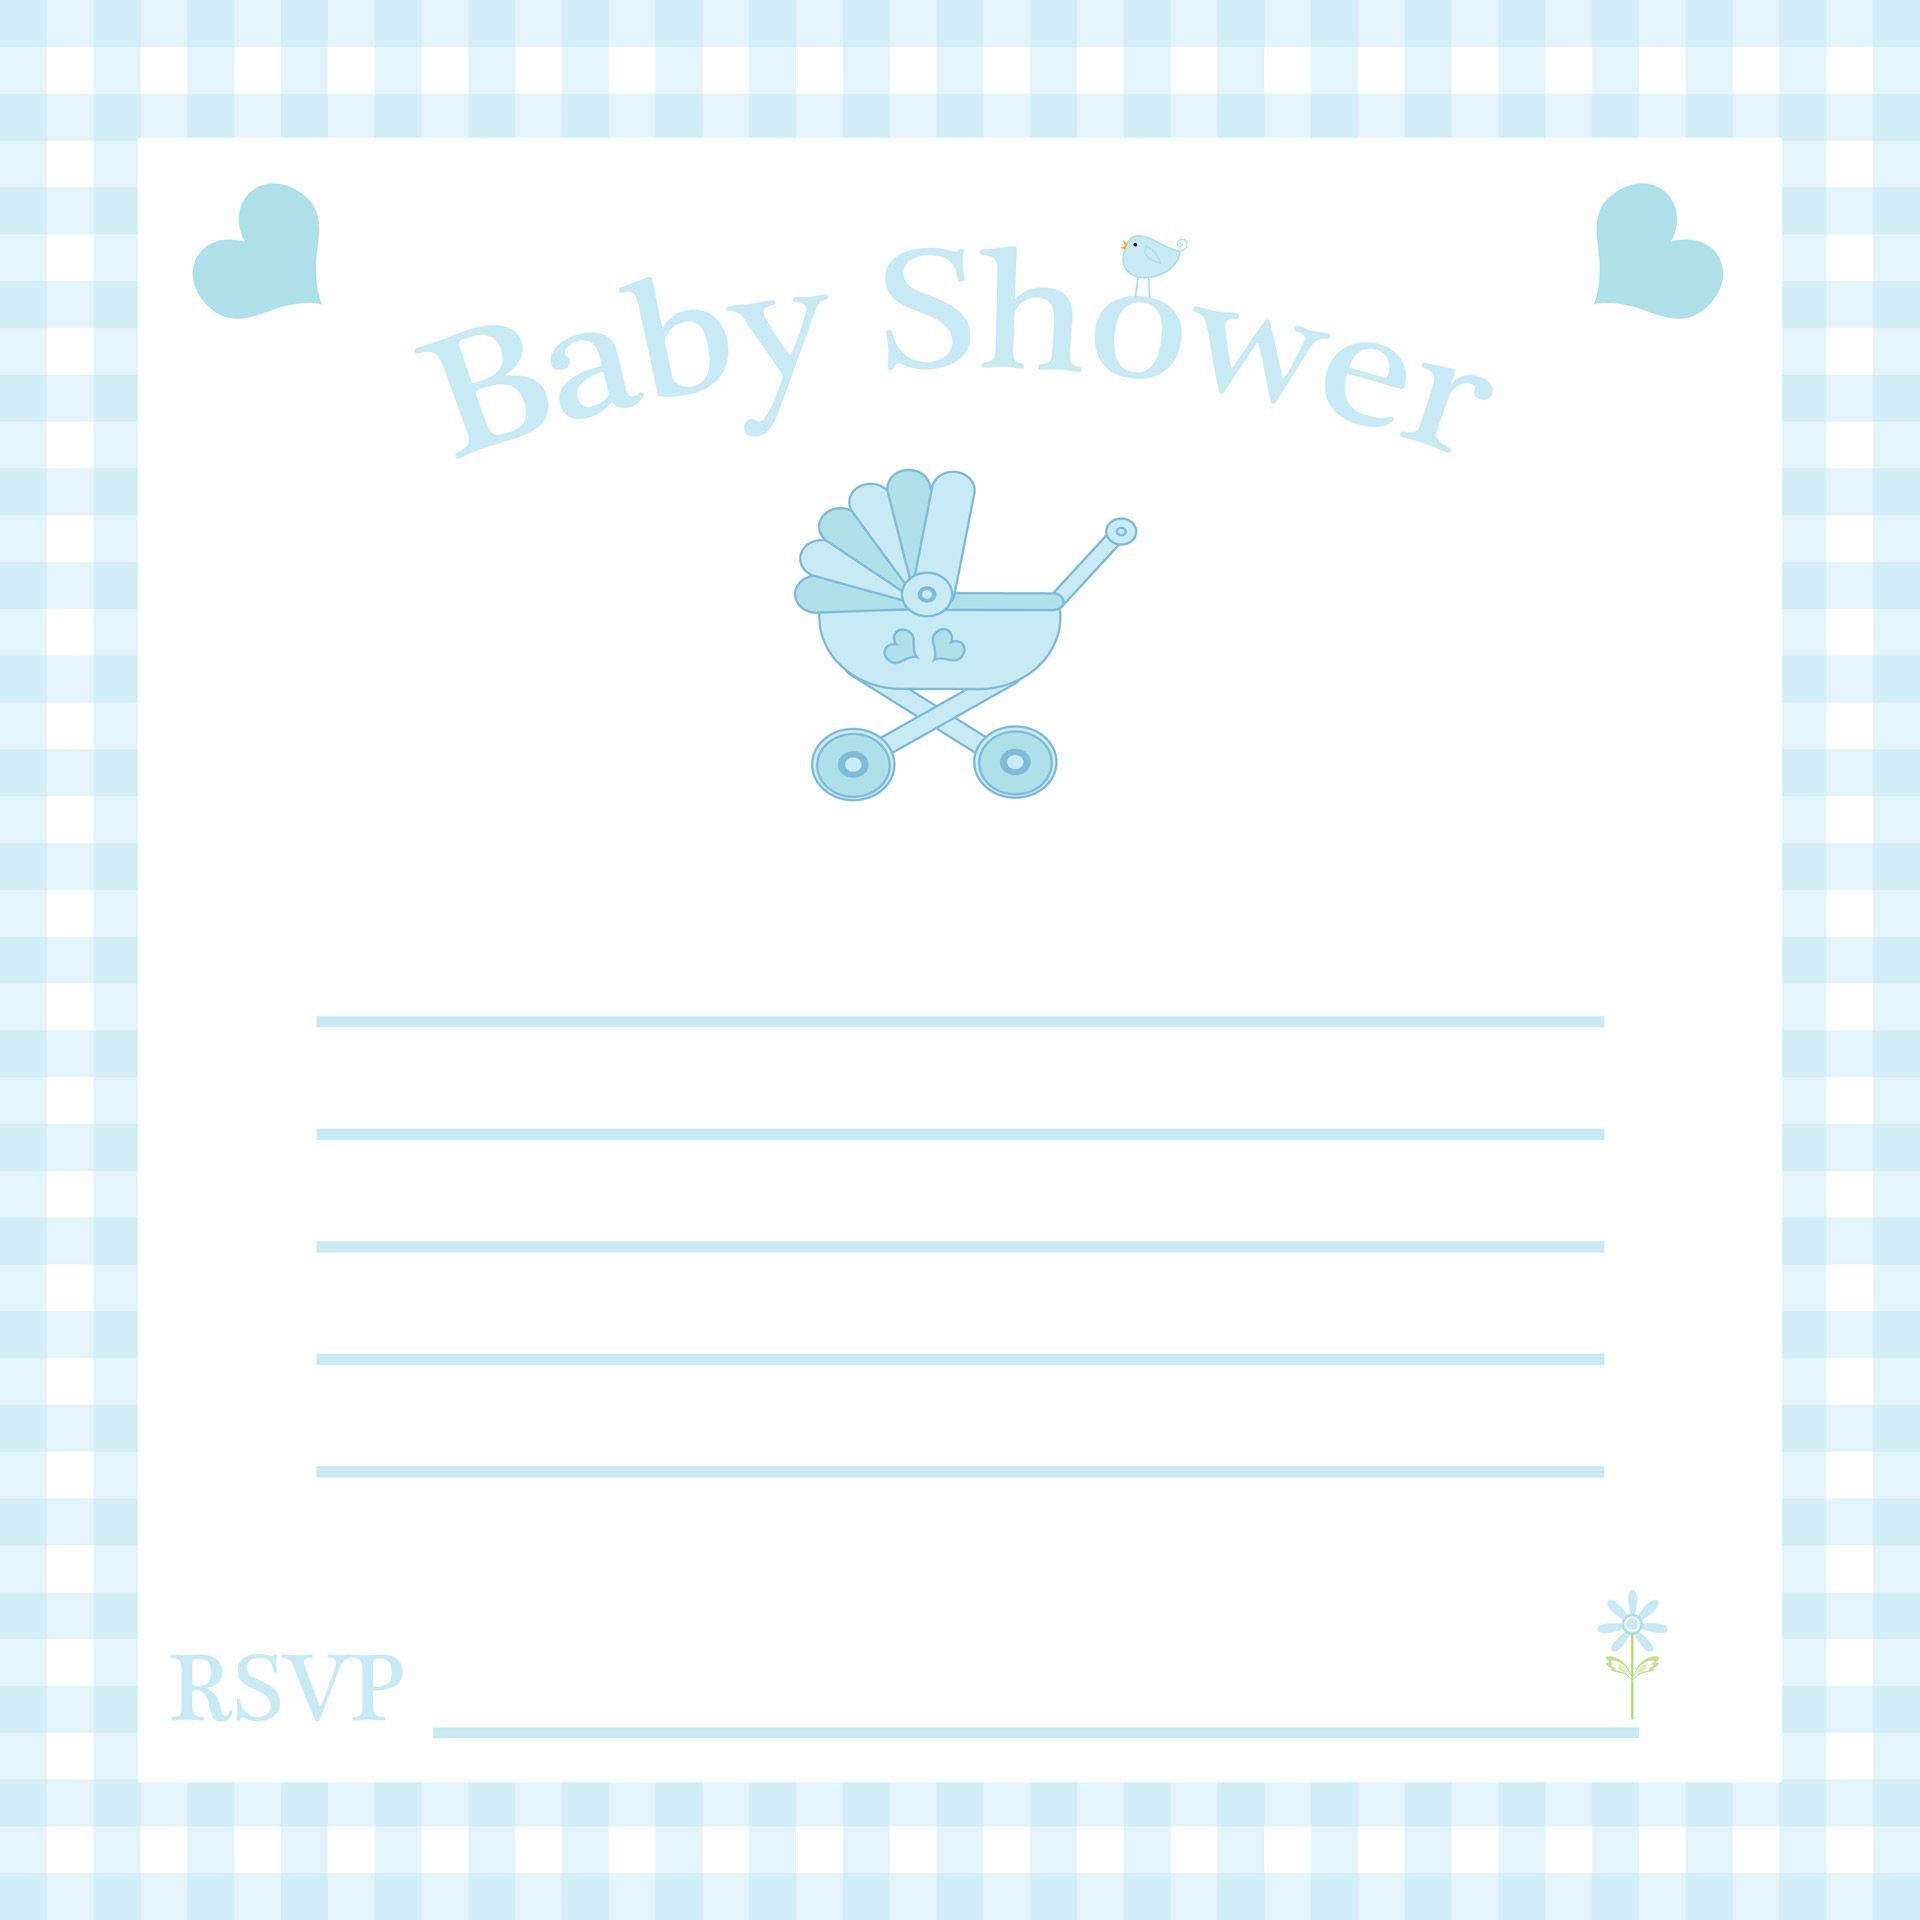 Full Size of Baby Shower:sturdy Baby Shower Invitation Template Image Concepts Baby Shower Invitation Template Baby Shower Goodie Bags Baby Shower Poems Baby Shower Ideas For Boys Baby Shower Favors To Make